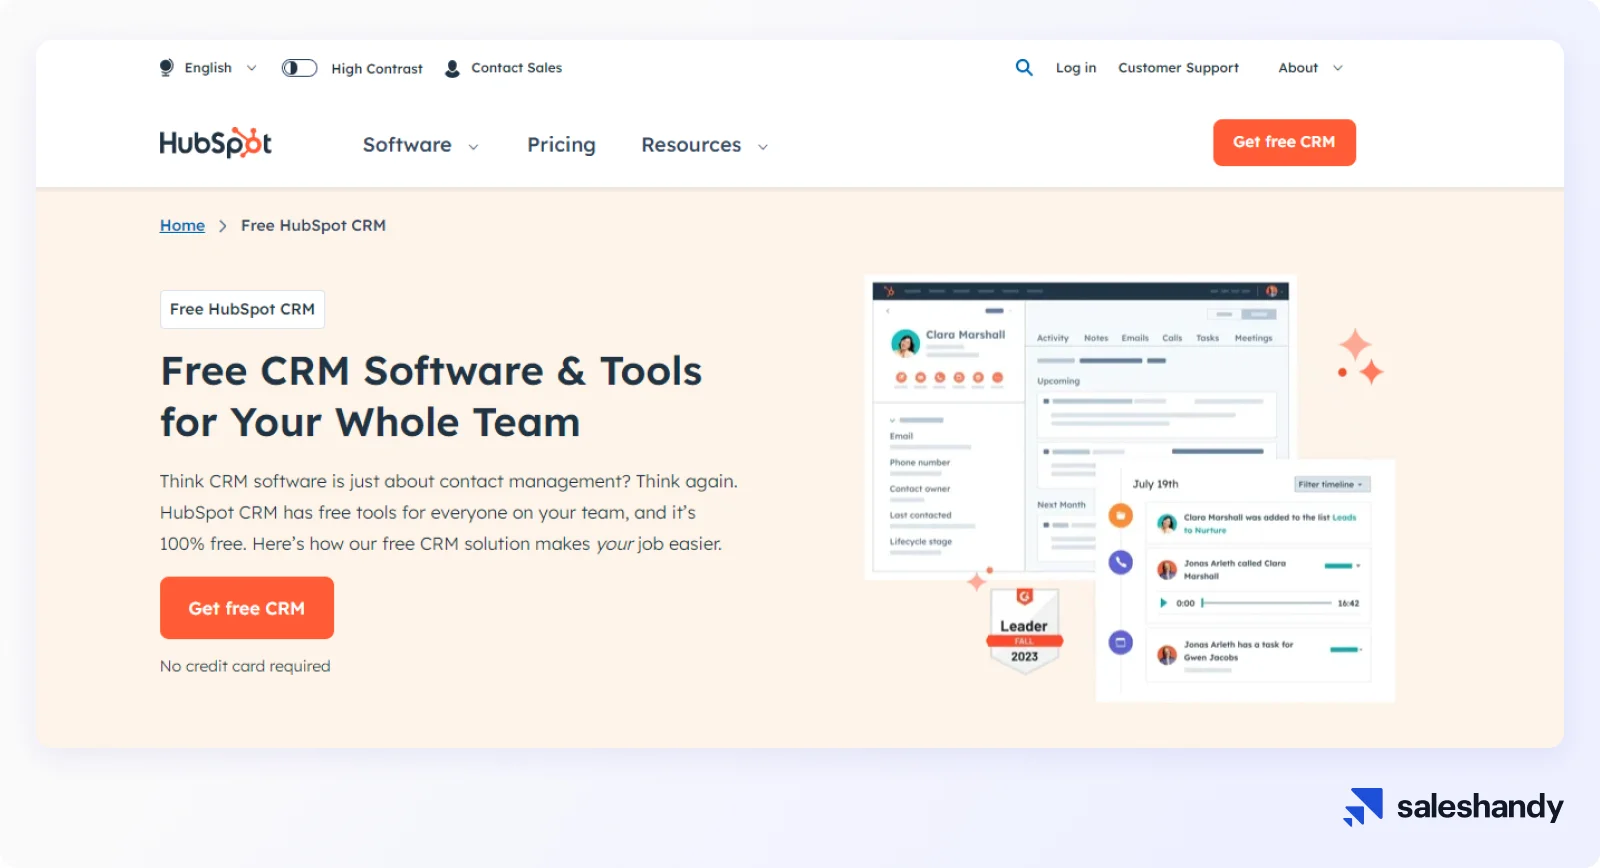 HubSpot is a CRM tool, which is essential for lead generation.